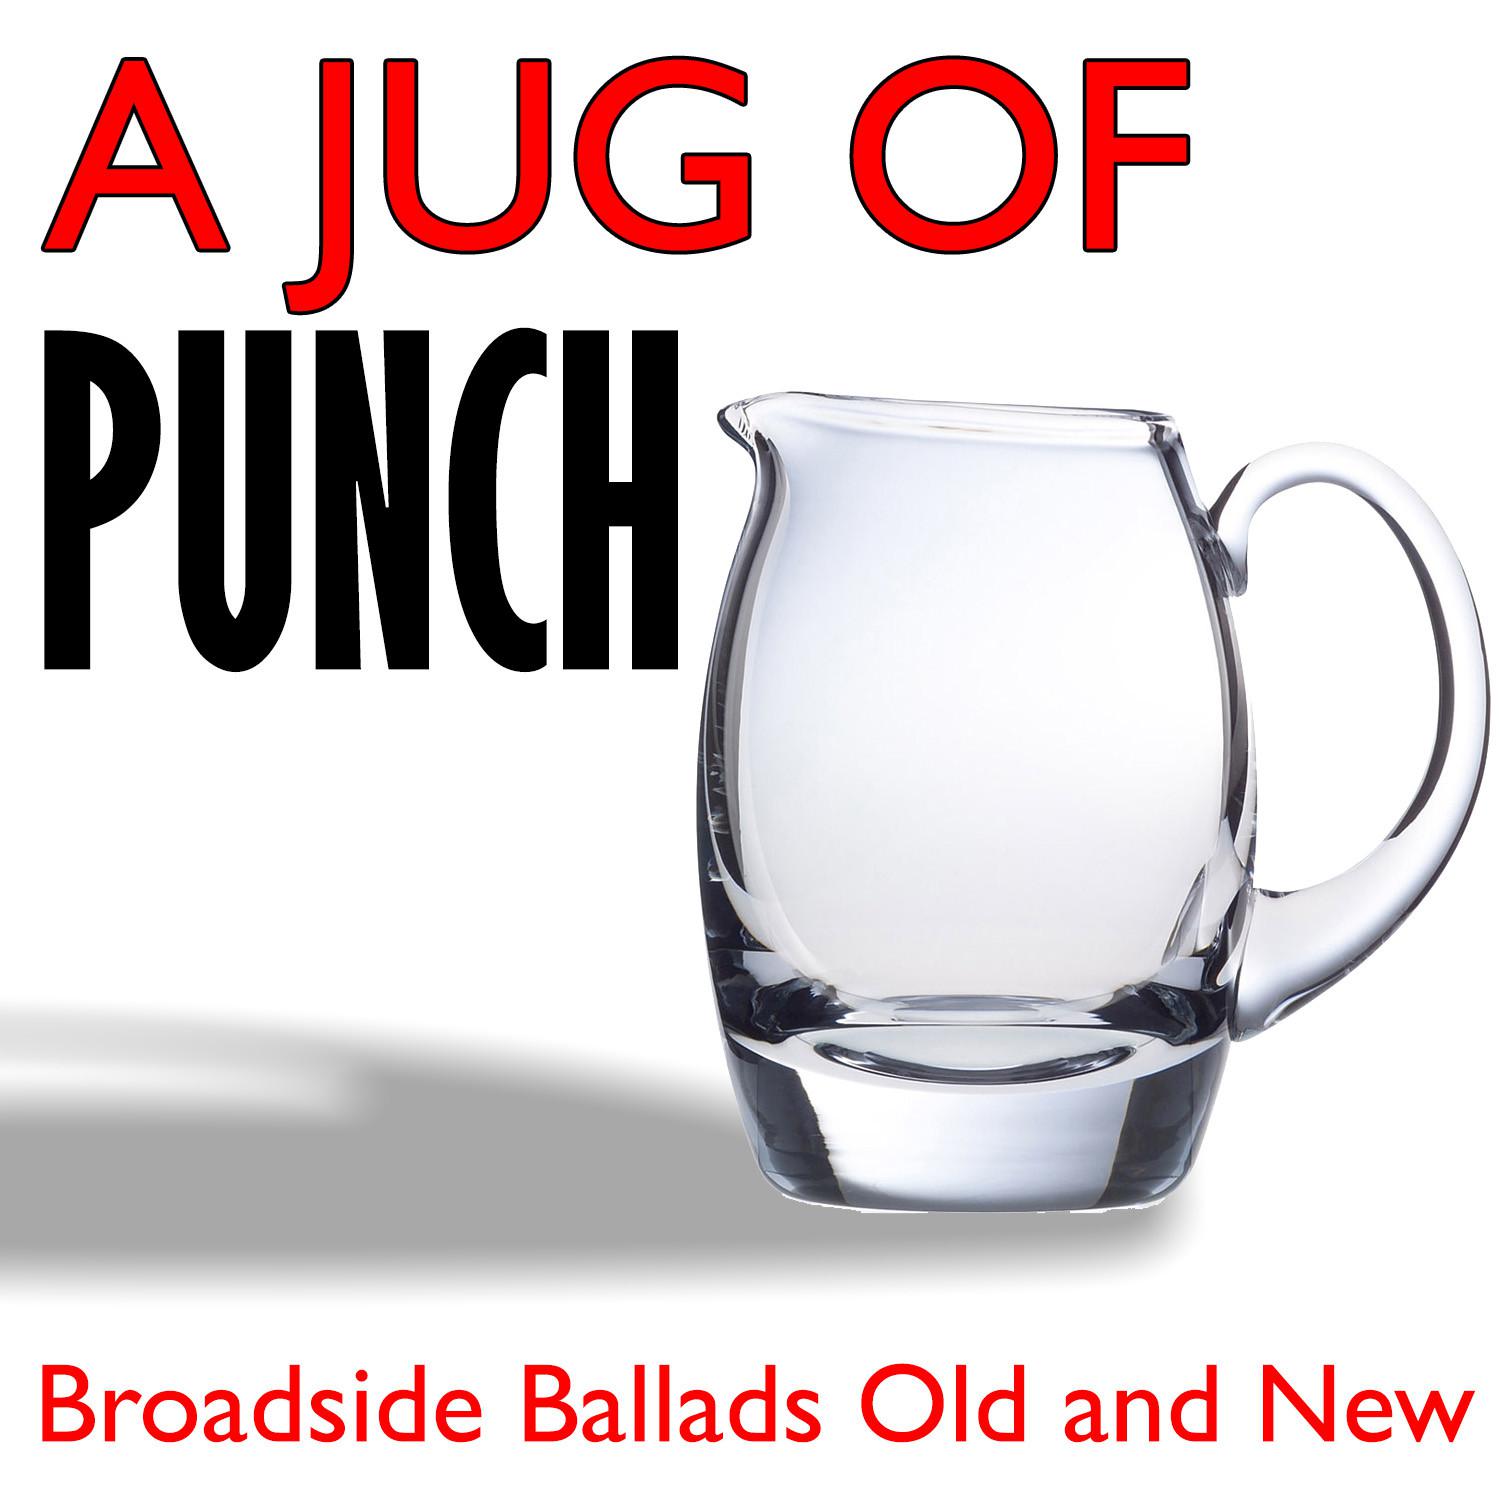 The Jug of Punch